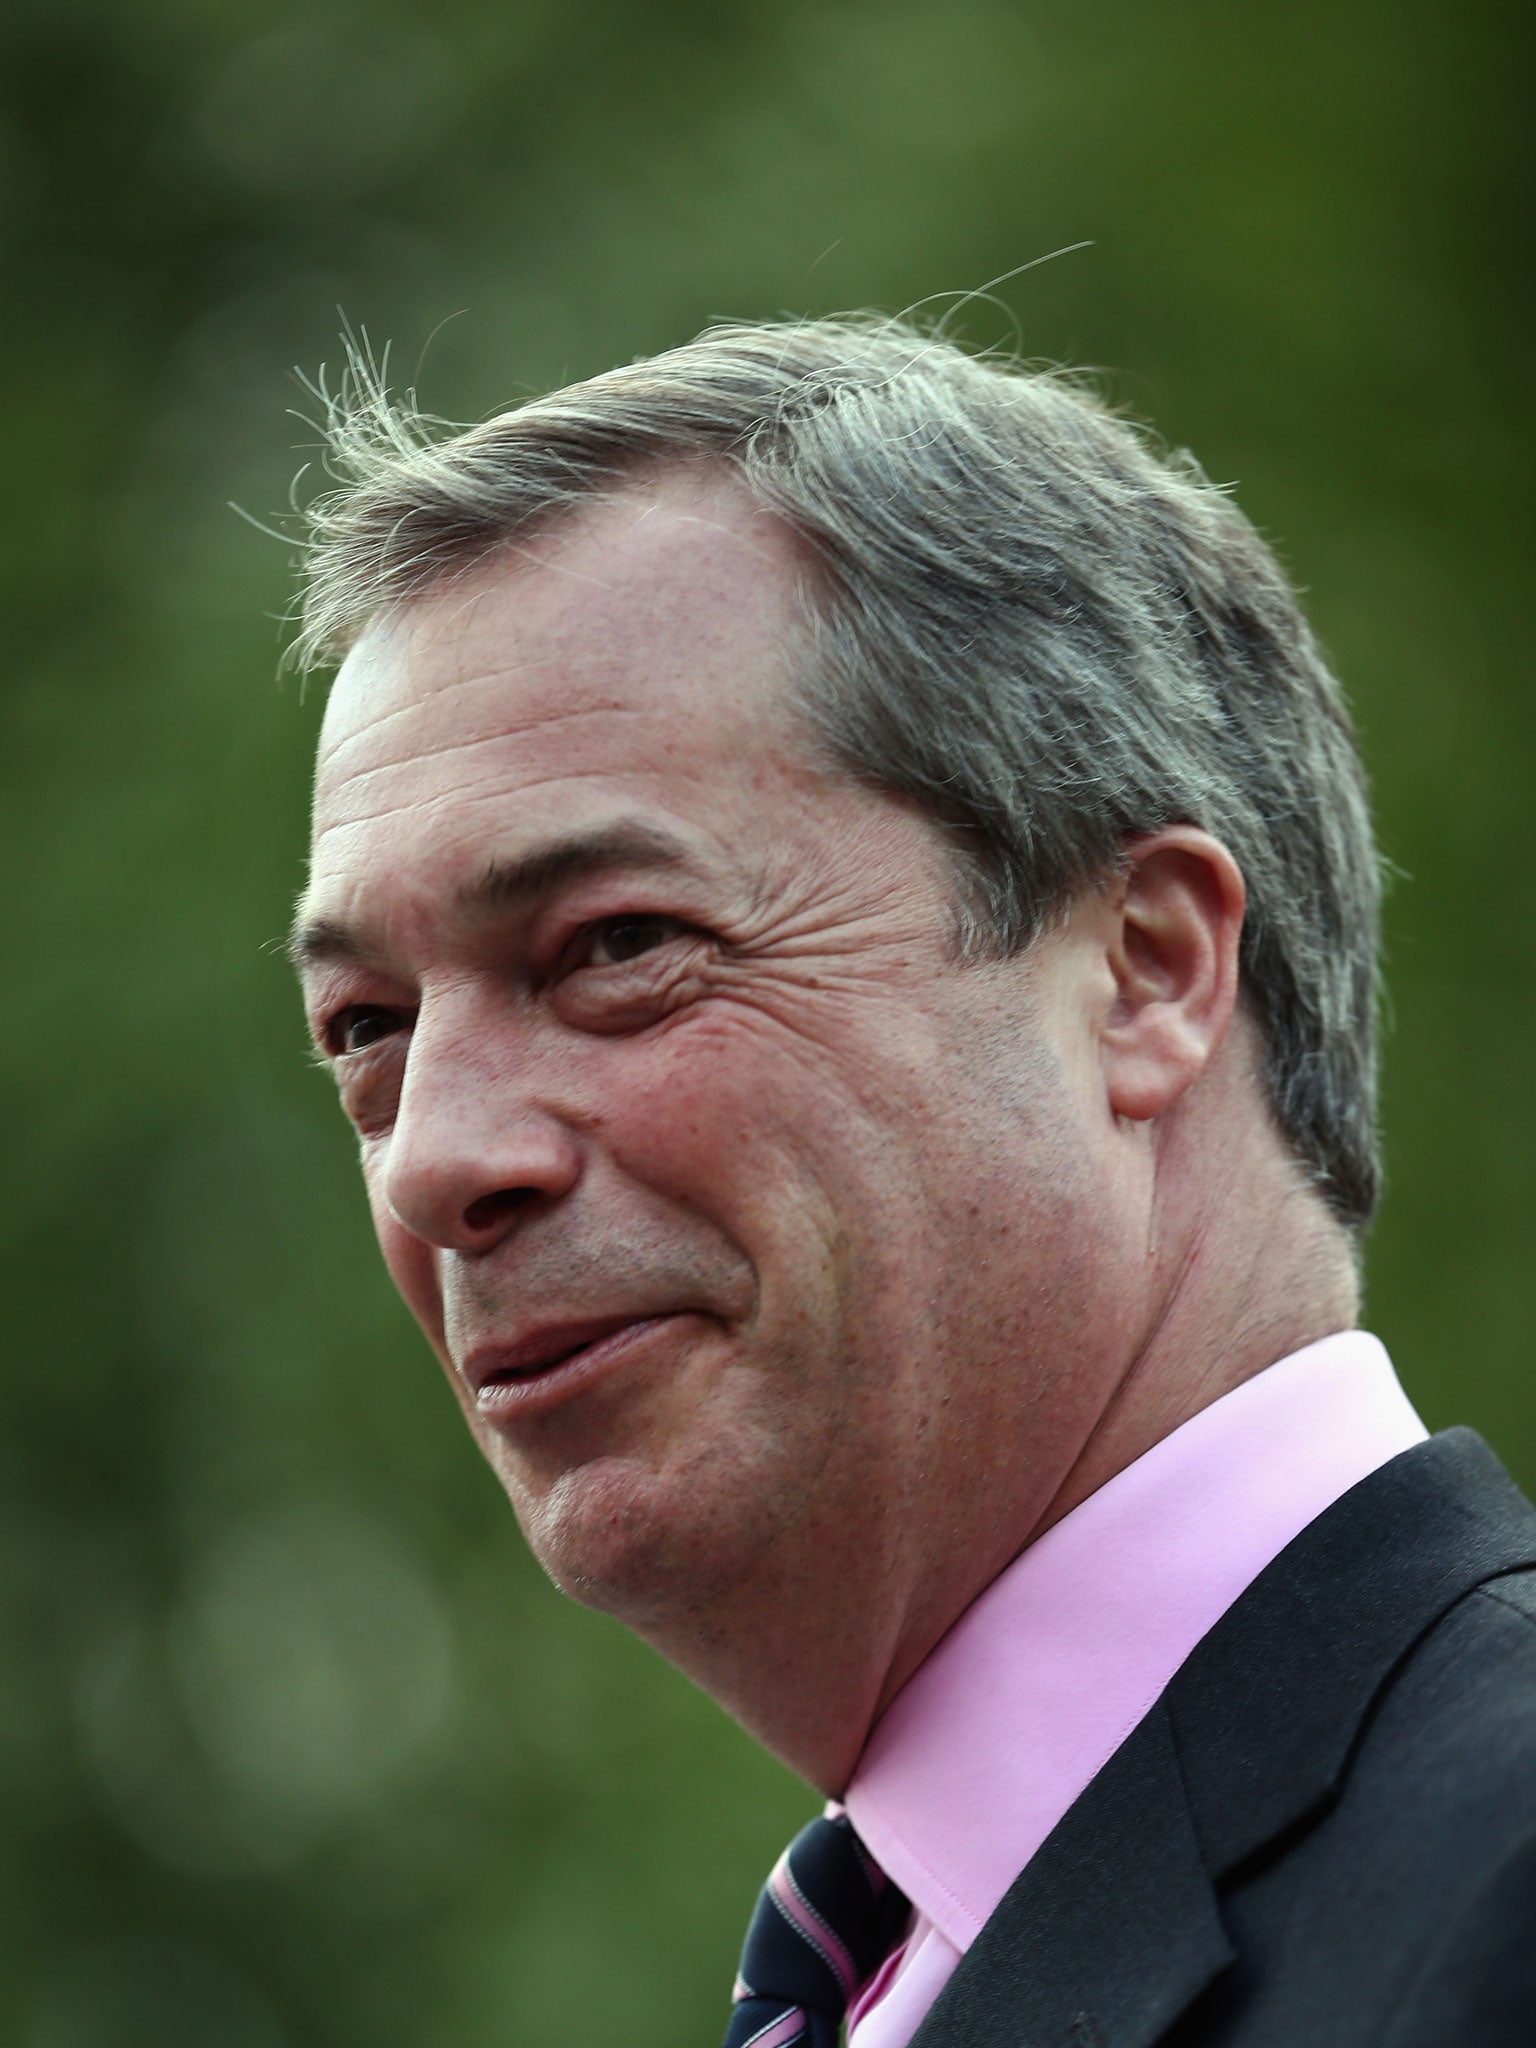 Nigel Farage's personal rating has gone from 31 to 40 per cent